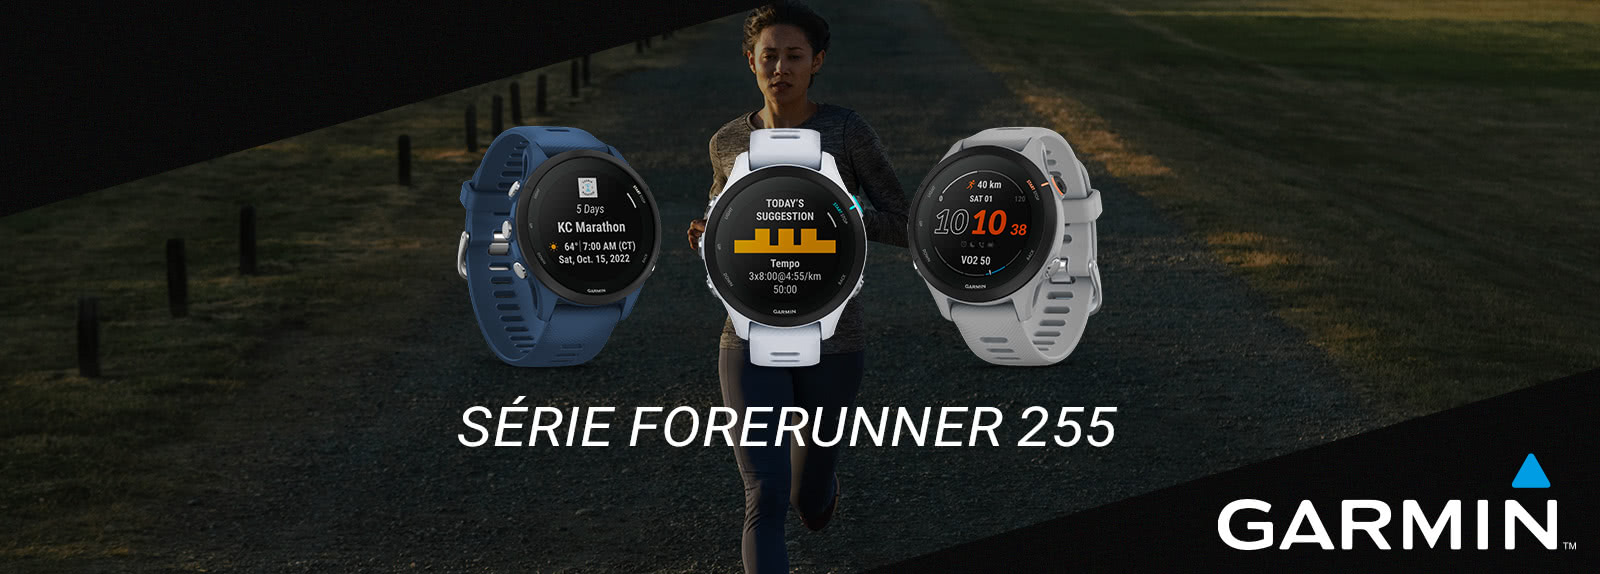 https://direct-running.fr/equipements/electronique/montres-connectees